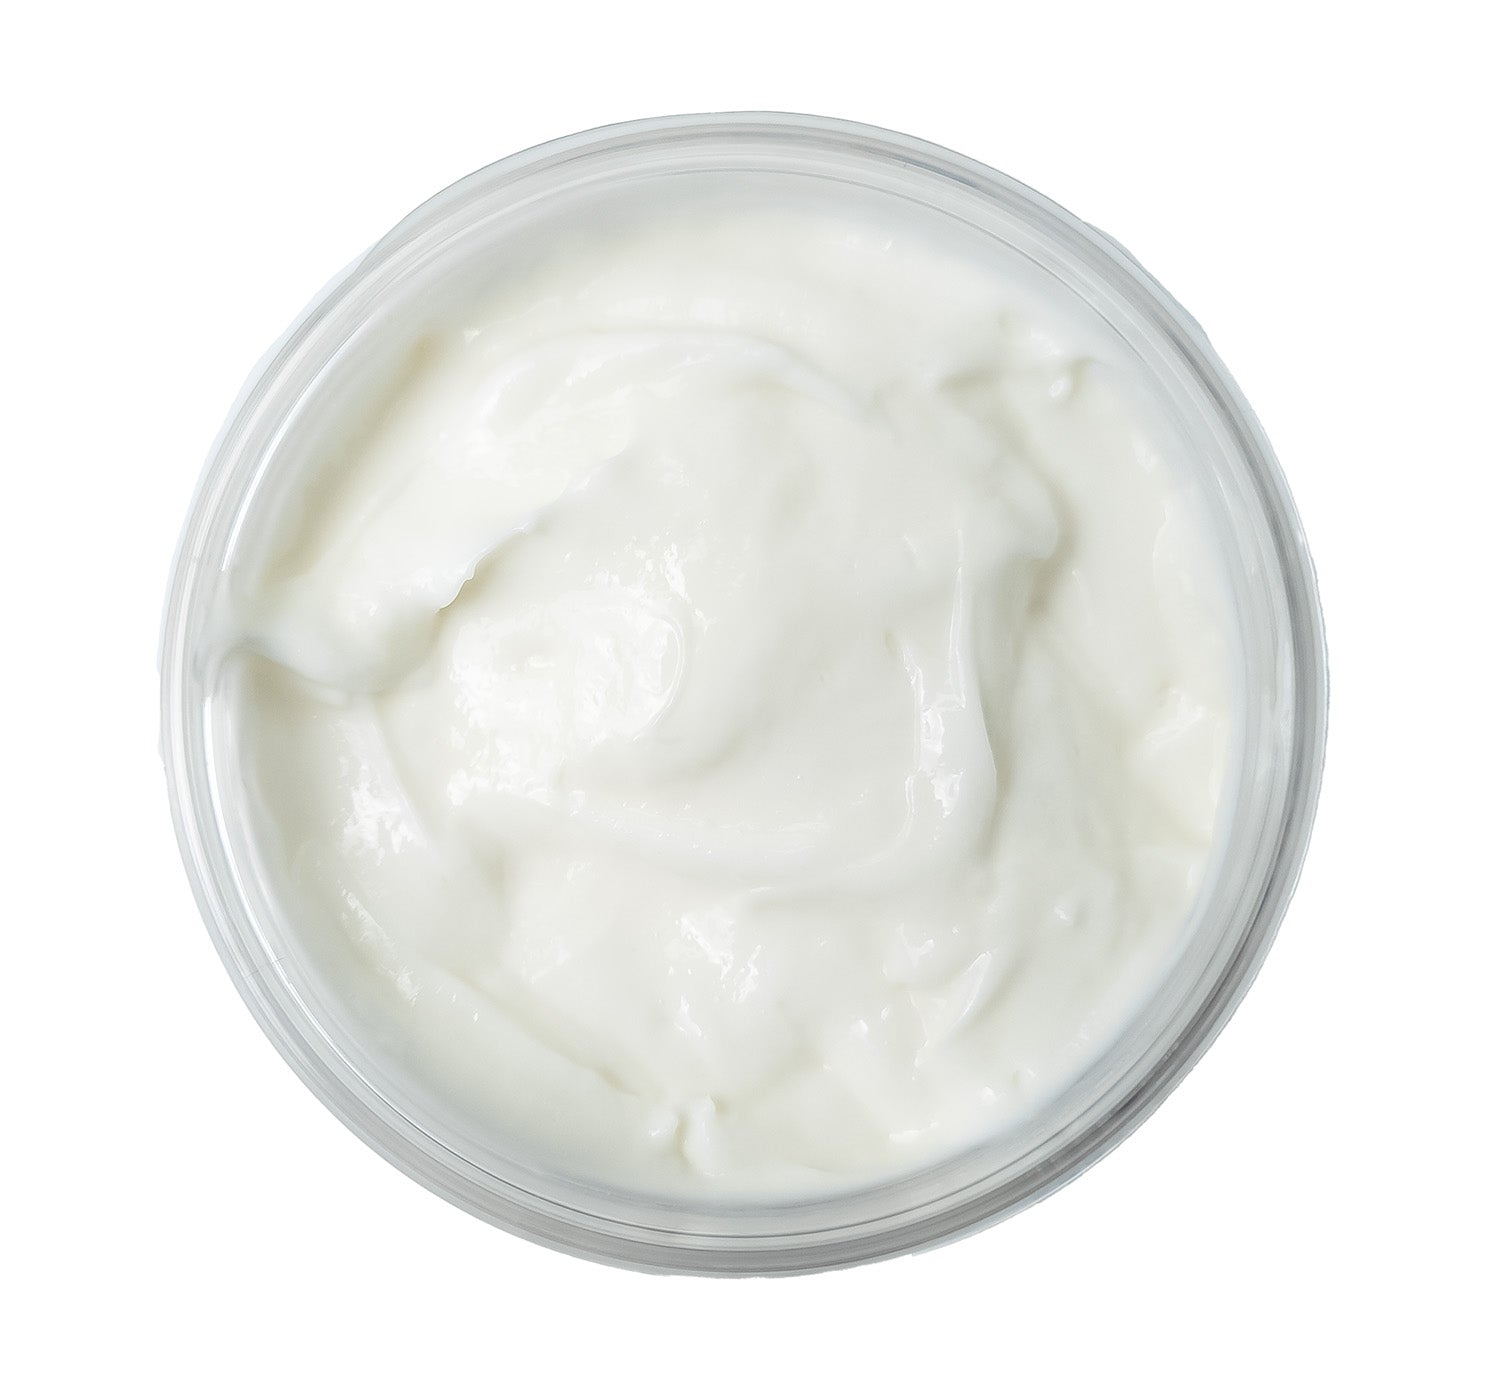 Body Butter Cream for Eczema and Sunburn. Made with Colloidal Oatmeal, Shea Butter and Aloe Vera